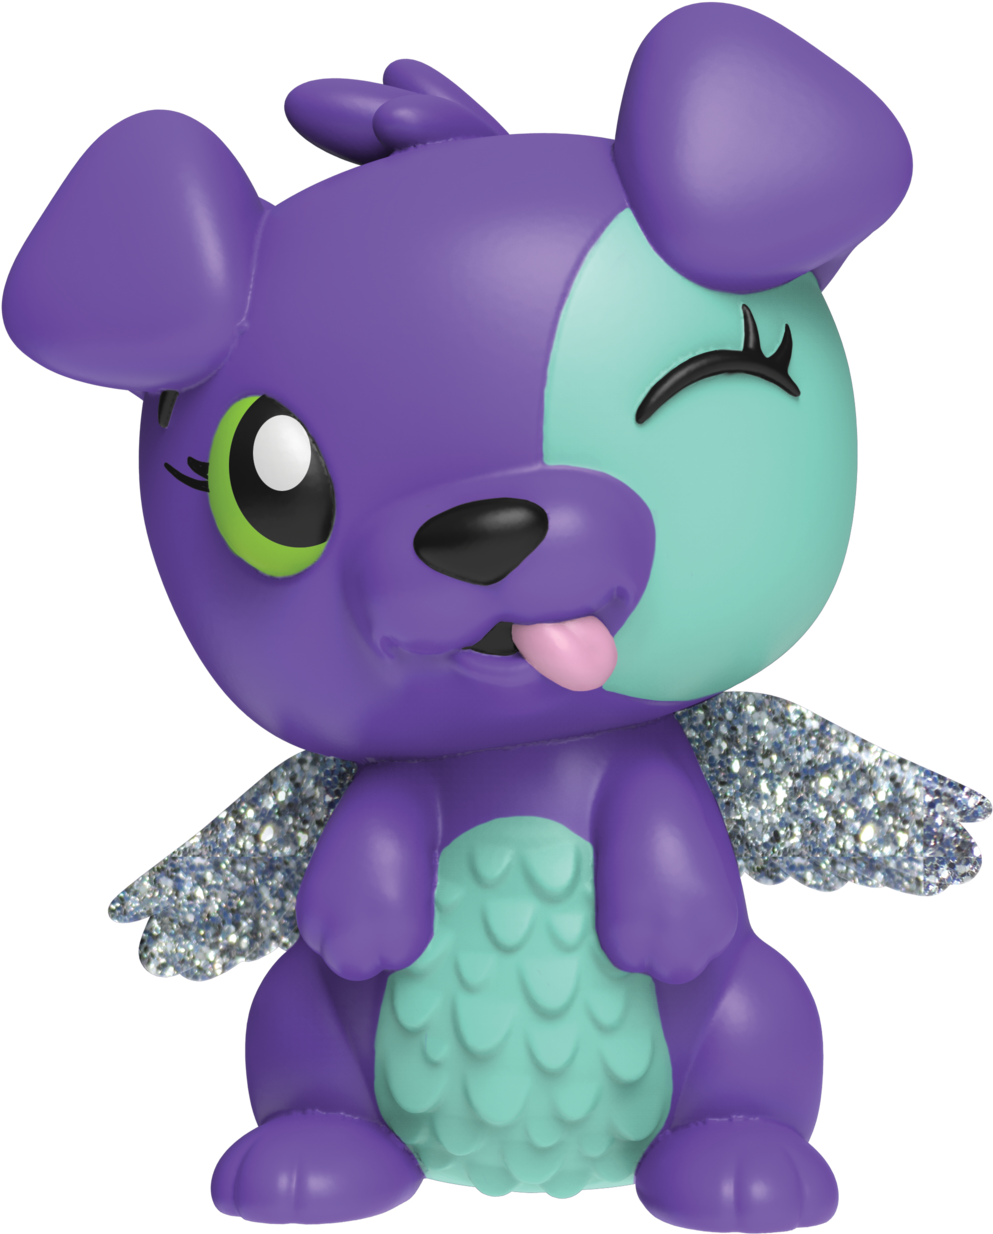 A Purple Dog With Wings And Tongue Sticking Out